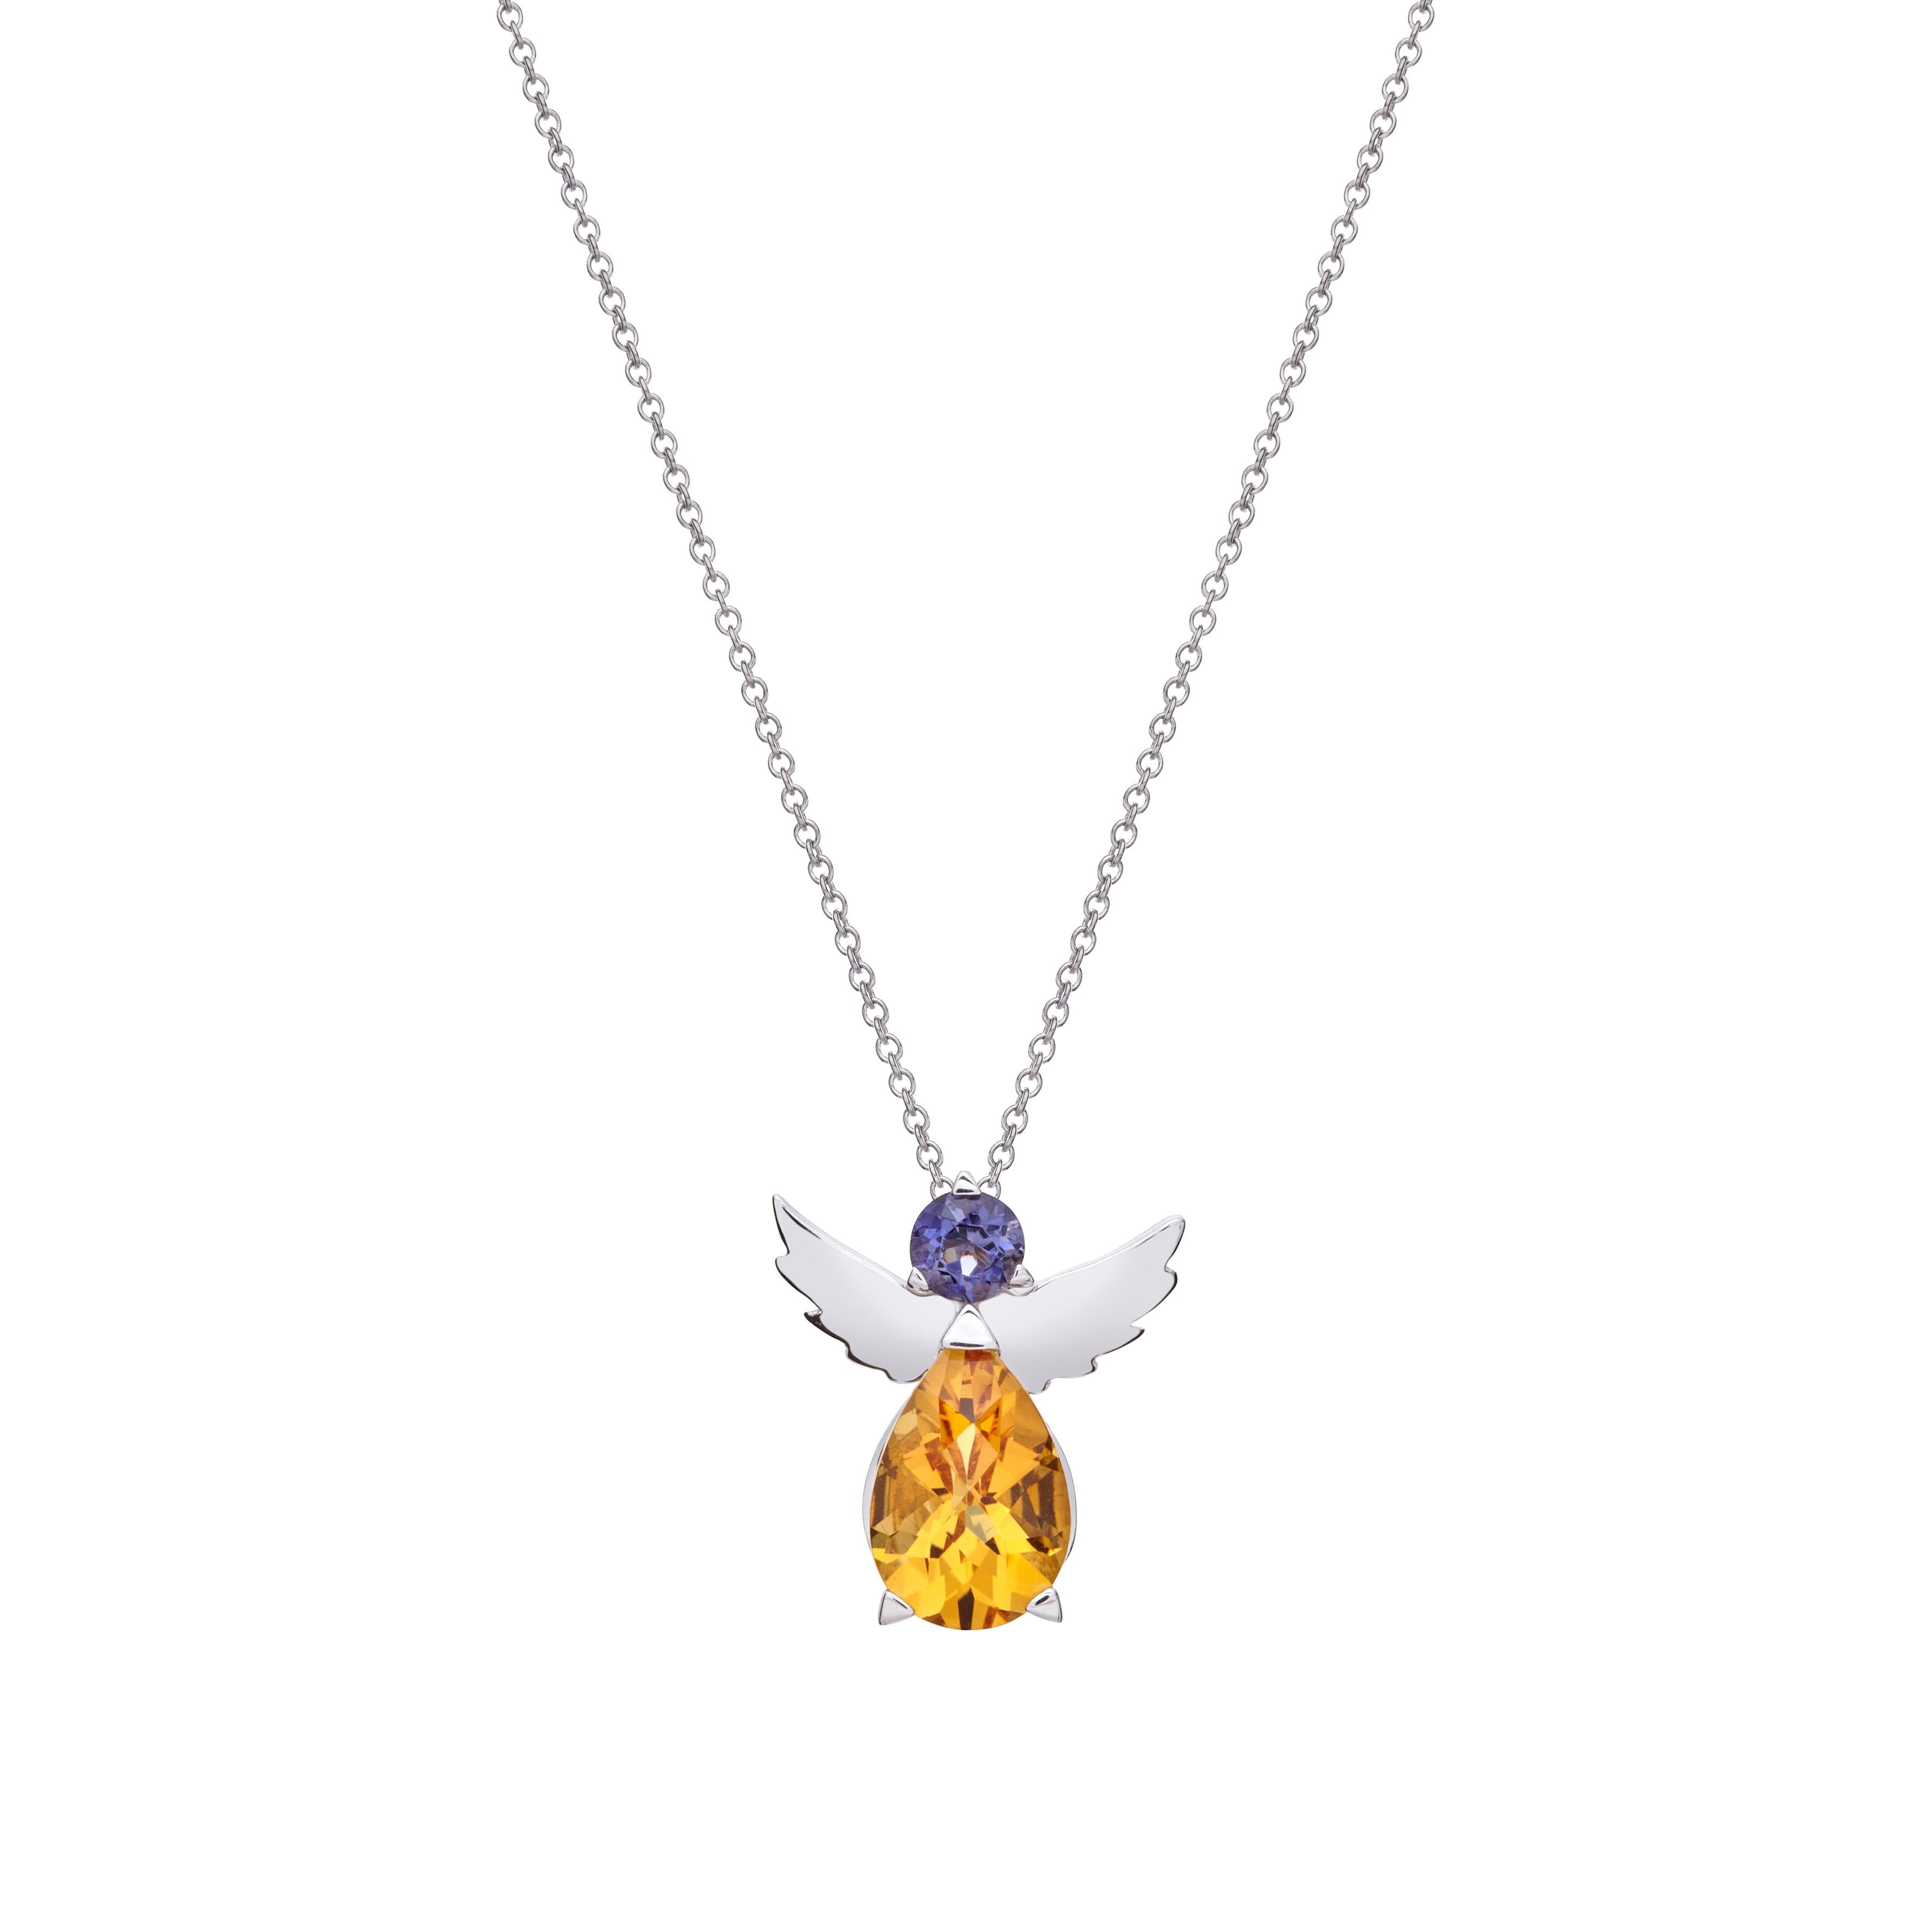 Modern Angel Pendant Necklace in 18Kt White Gold with Yellow Citrine and Blue Iolite For Sale